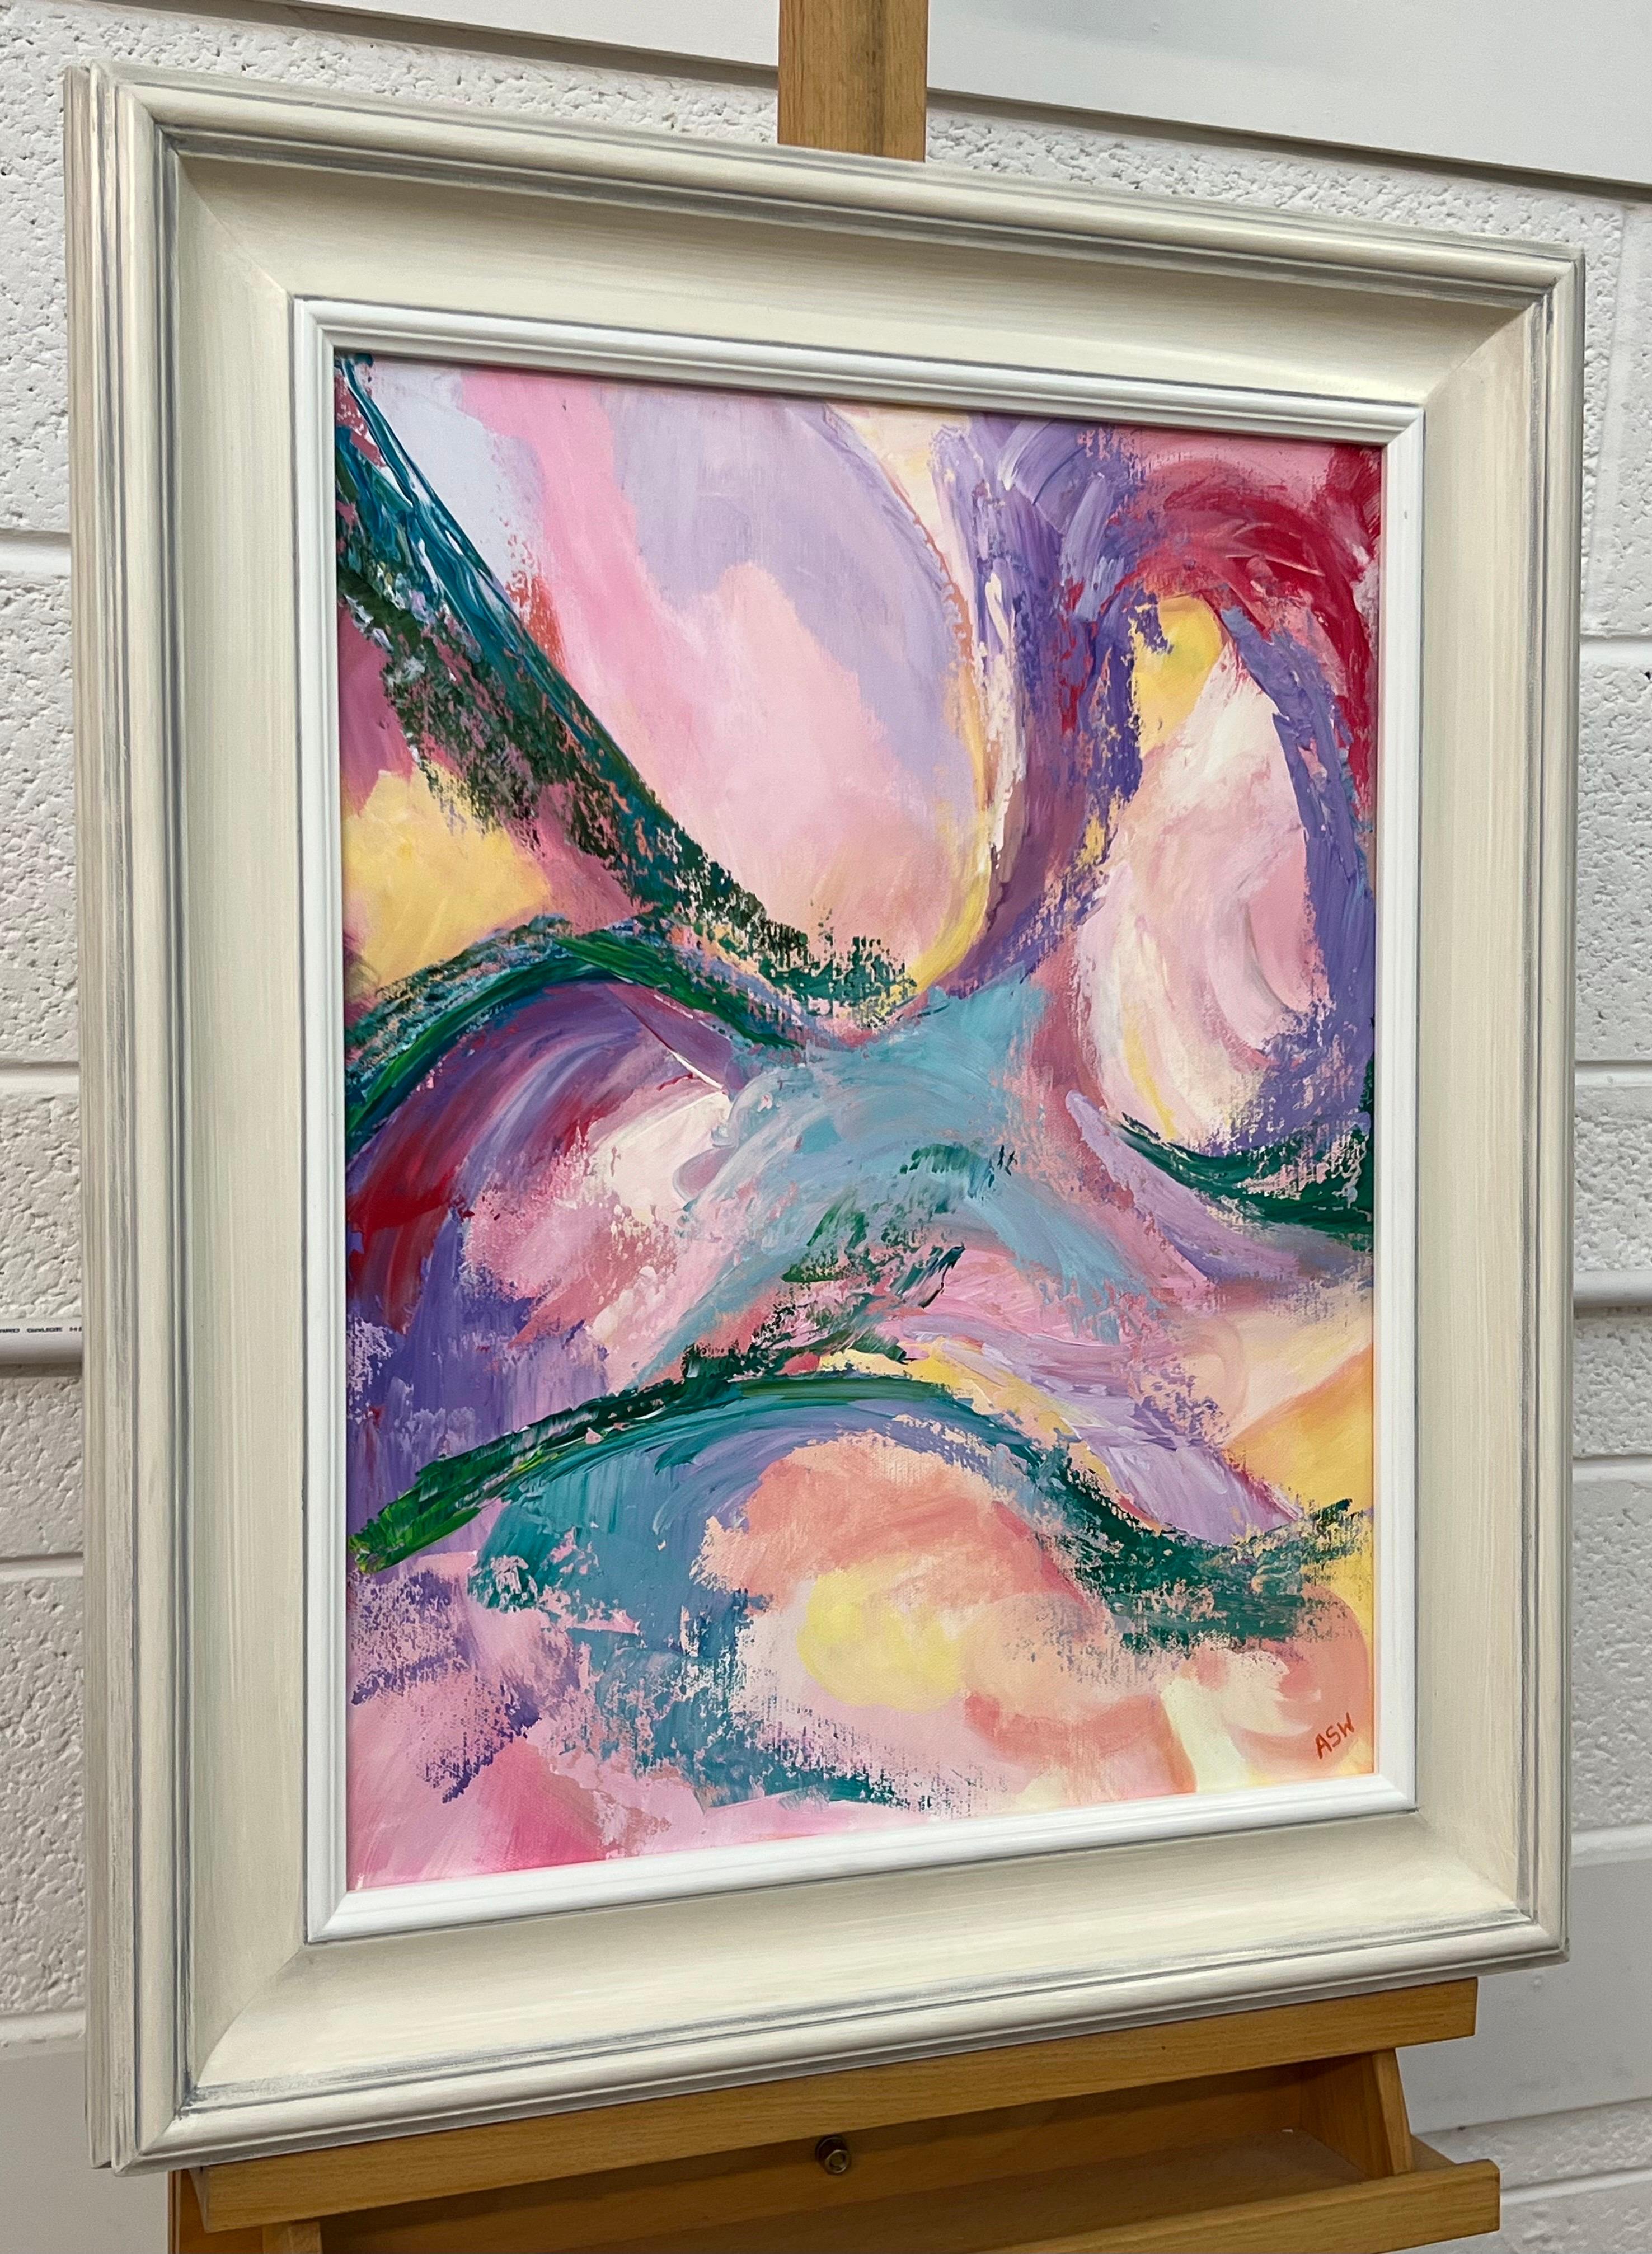 Abstract Lilac Turquoise Red Pink & Green Canvas Art by British Contemporary Artist, Angela Wakefield. This original is from the 'Spring Burst' Interior Design Series. Framed in a high quality off-white shabby chic contemporary wooden moulding.

Art